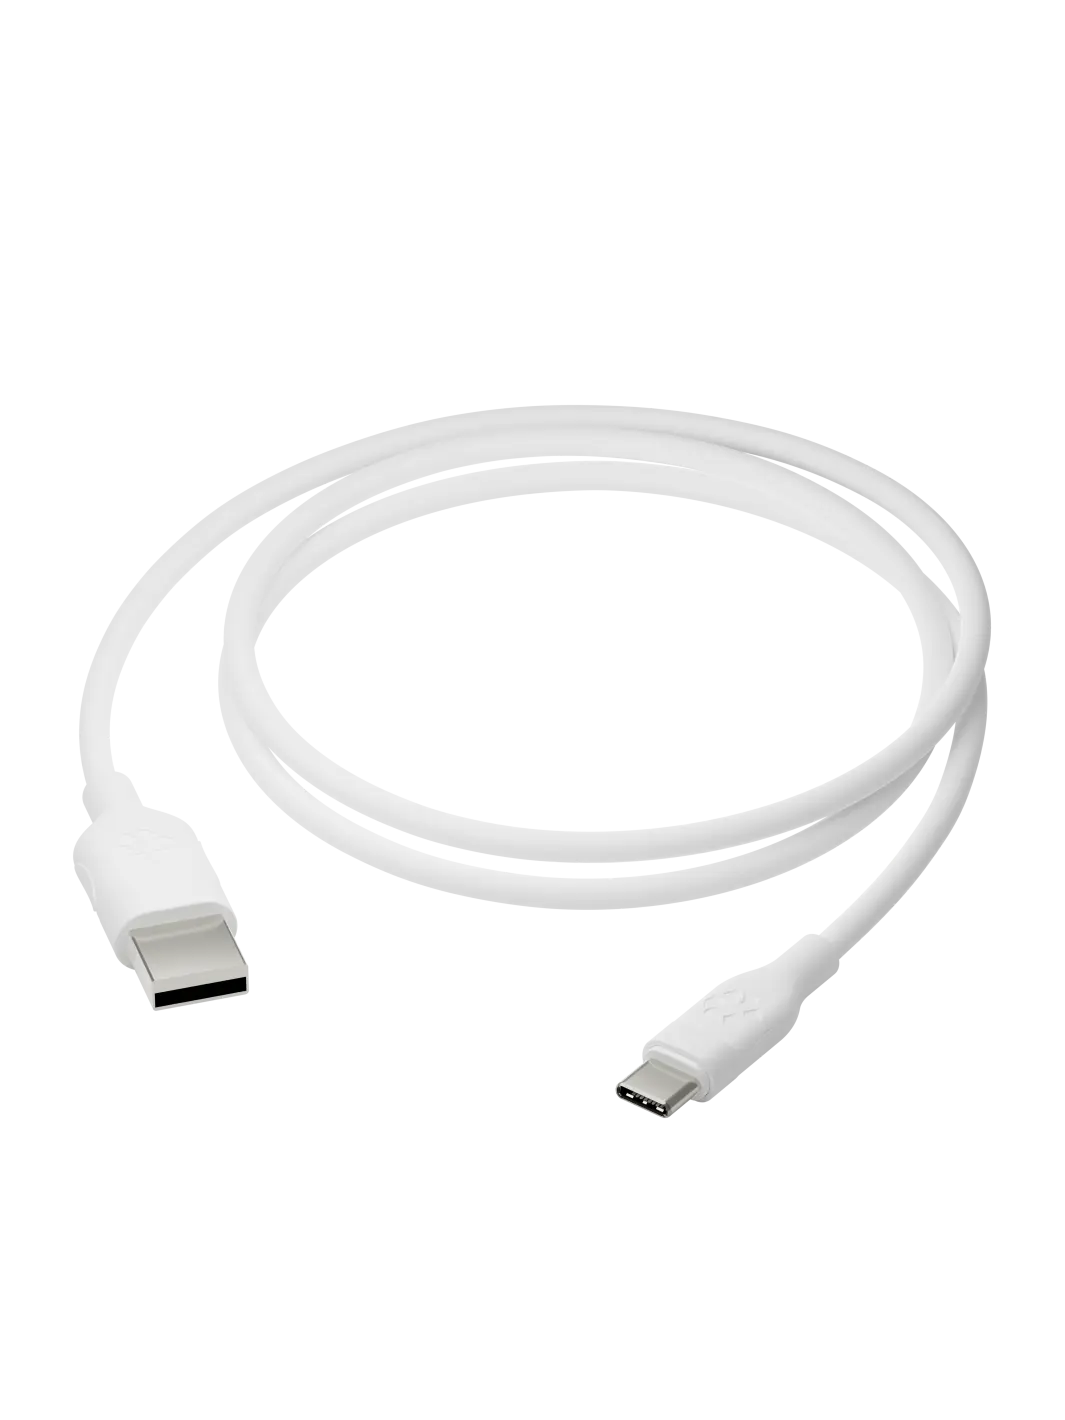 CABLES - STANDARD White USB-A to USB-C 1.2m Cables